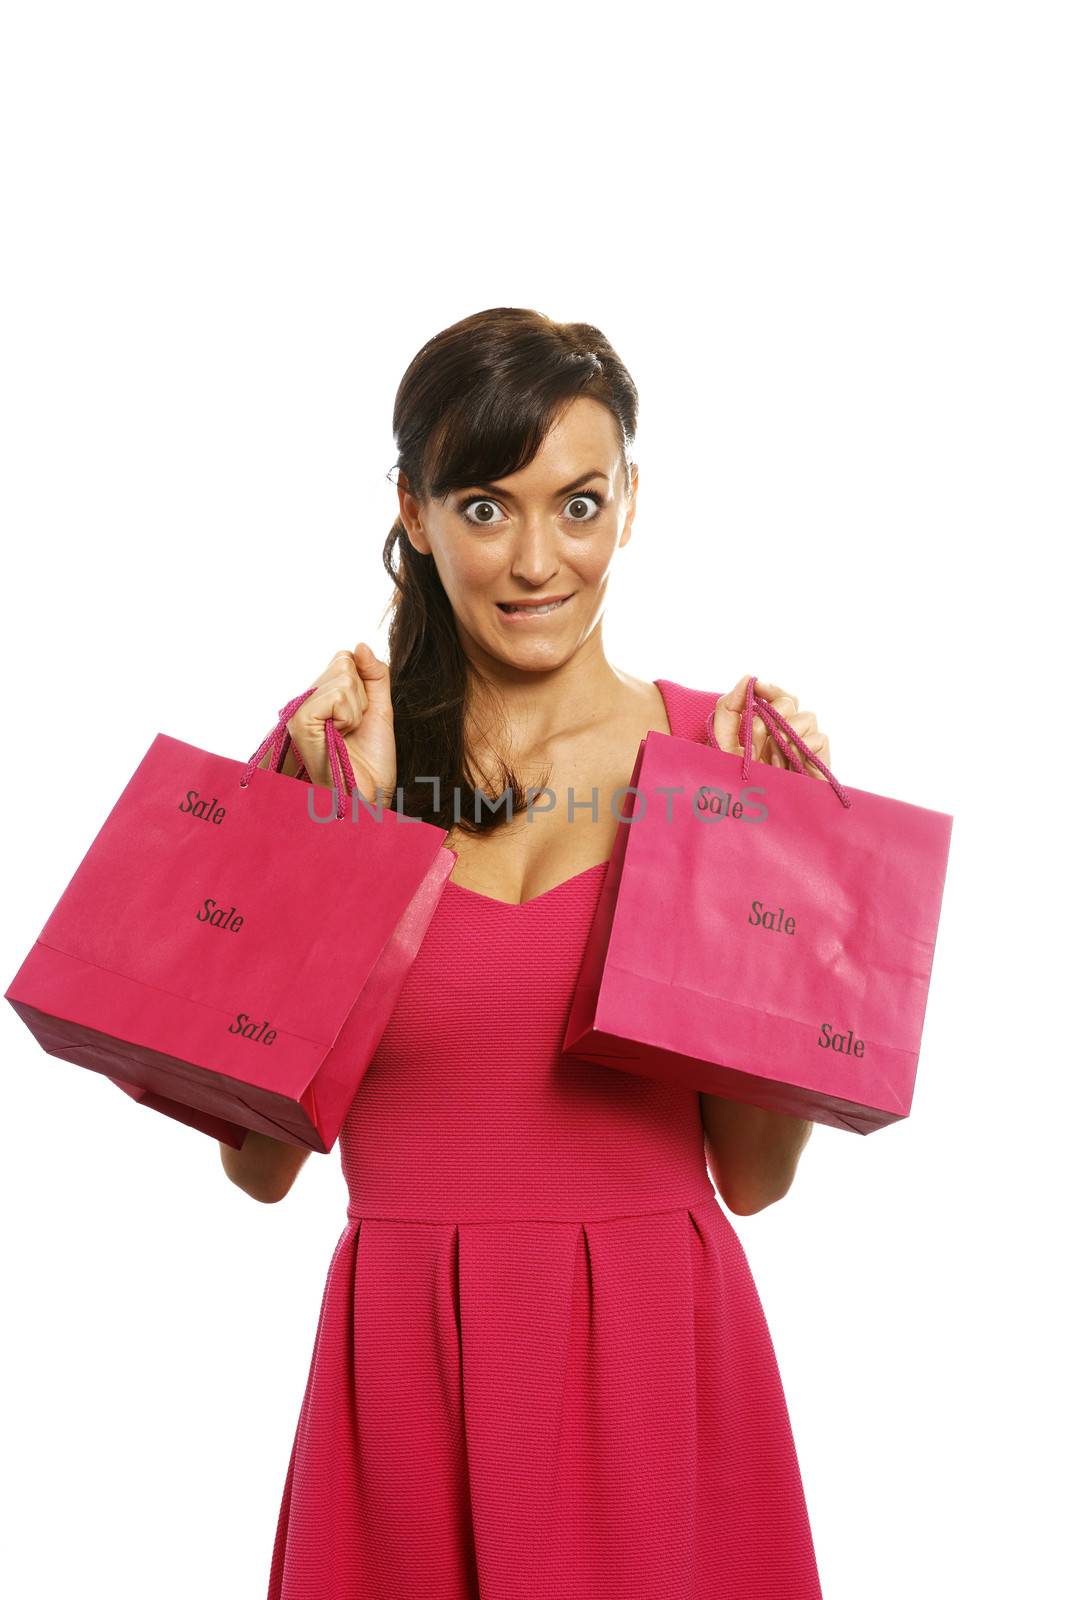 Woman with sale bags by studiofi